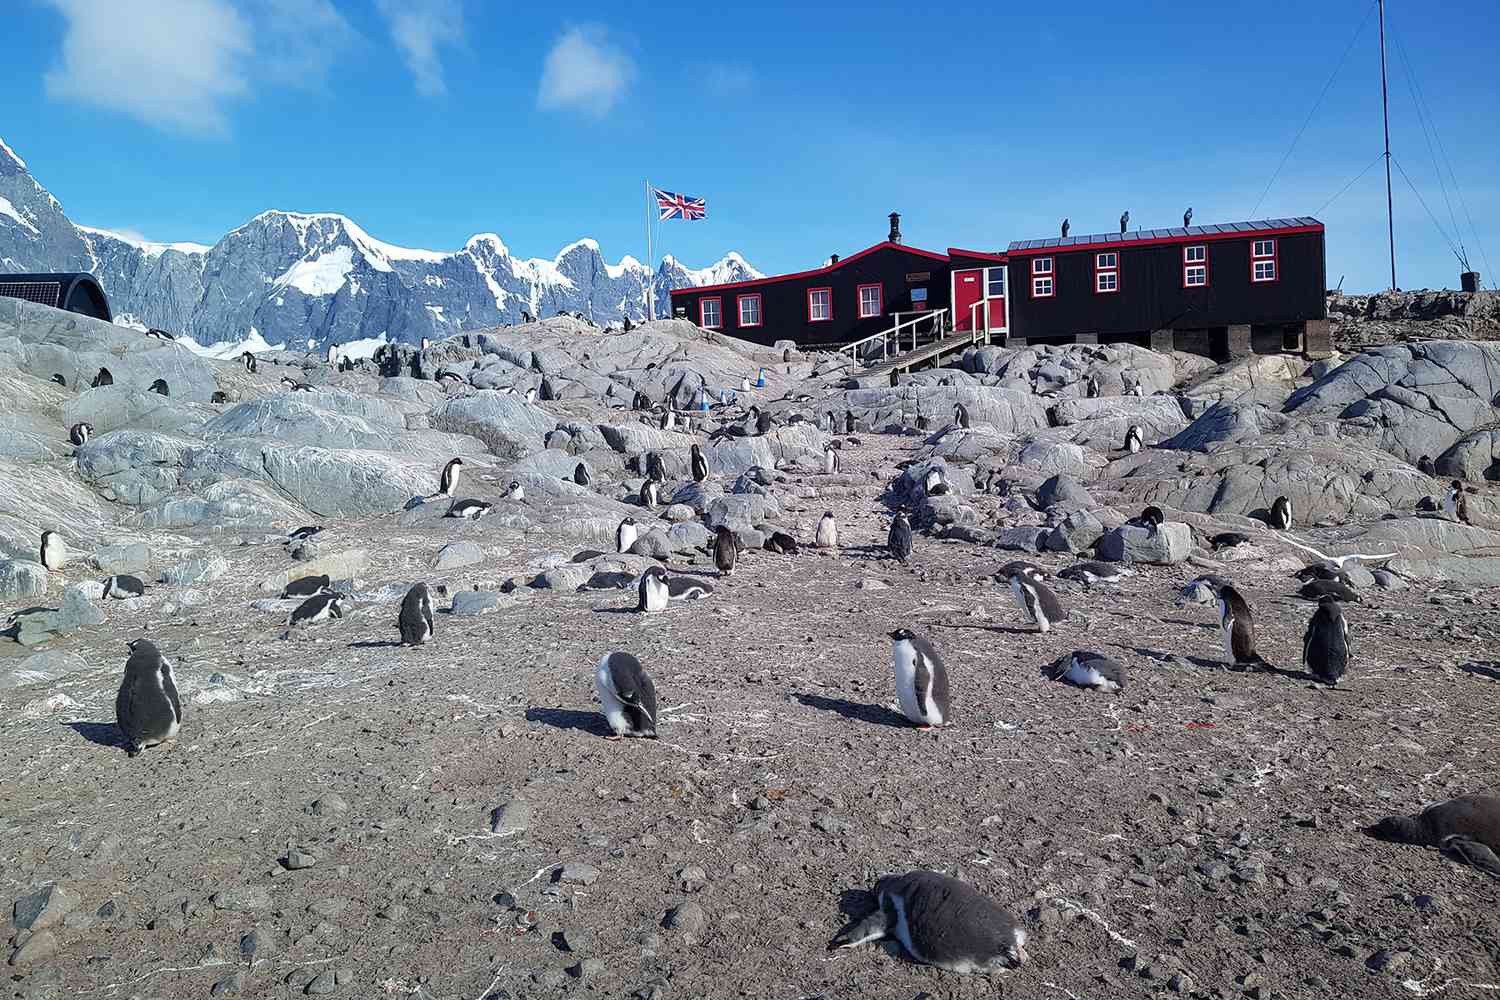 A Postal Office In Antarctica? You Betcha